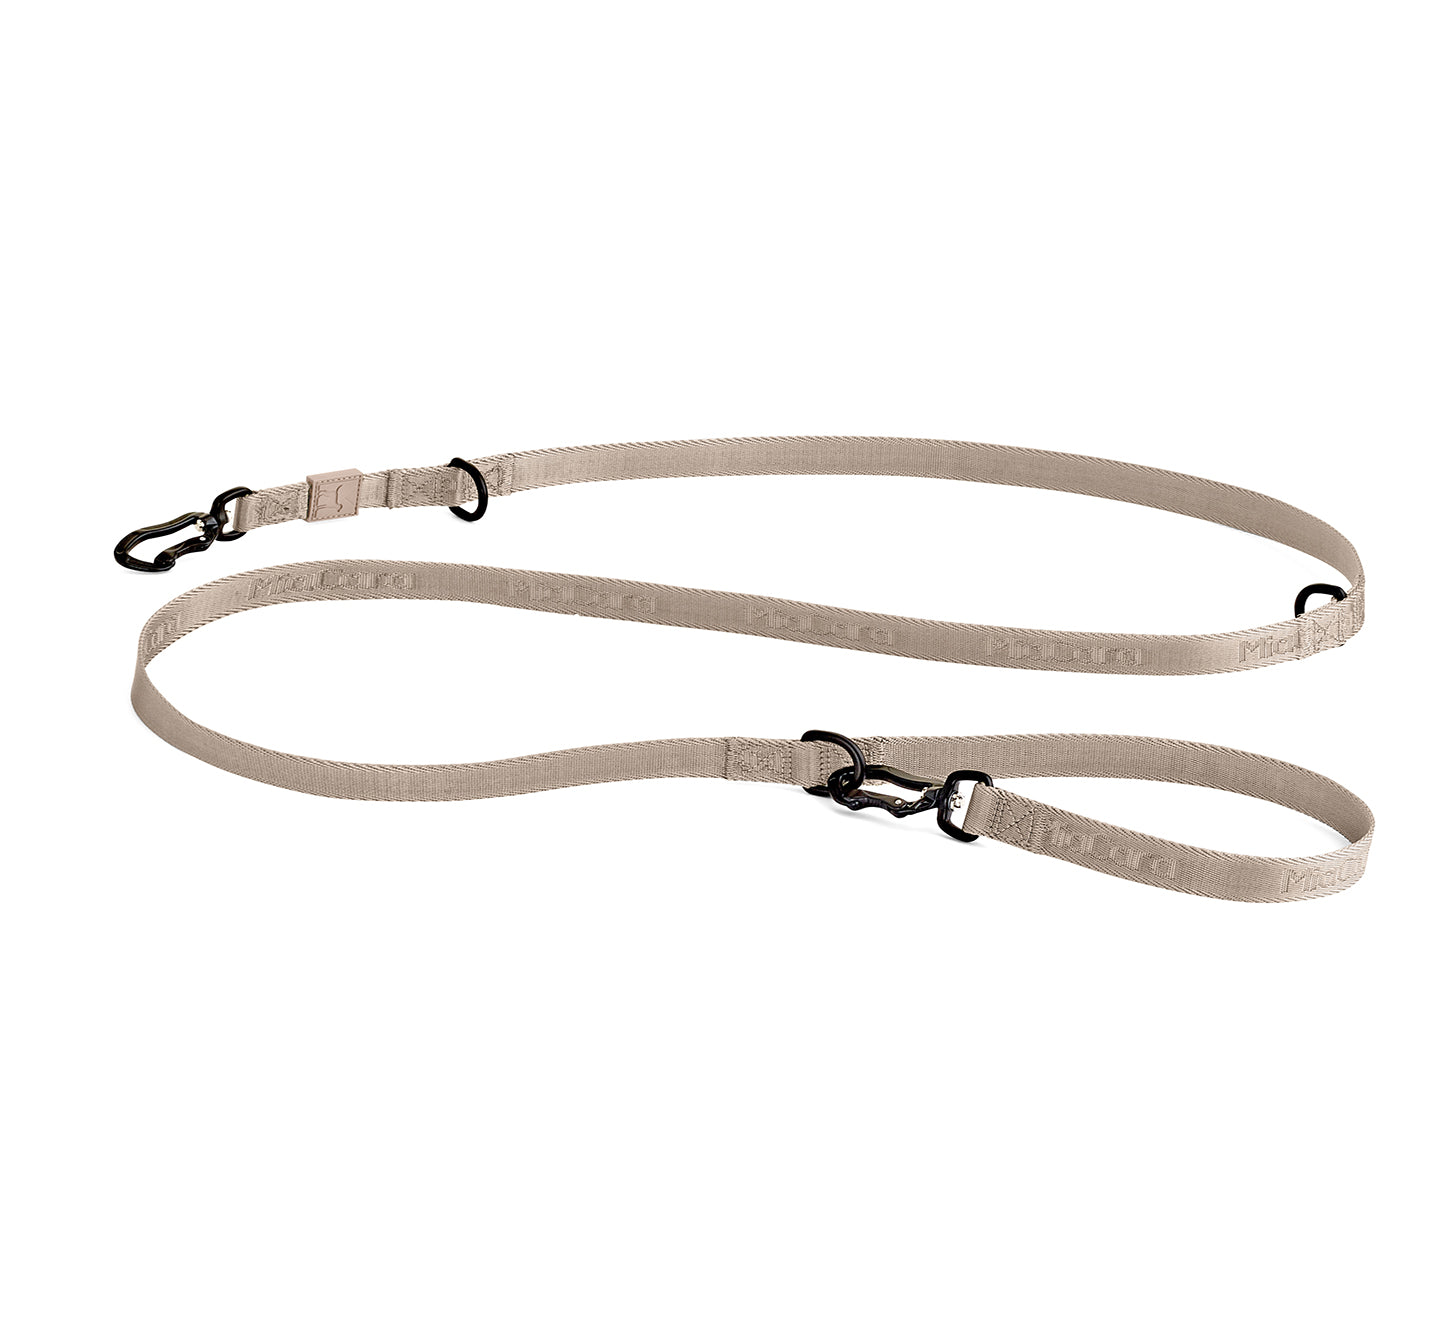 Lightweight and strong long leash for outdoor walks